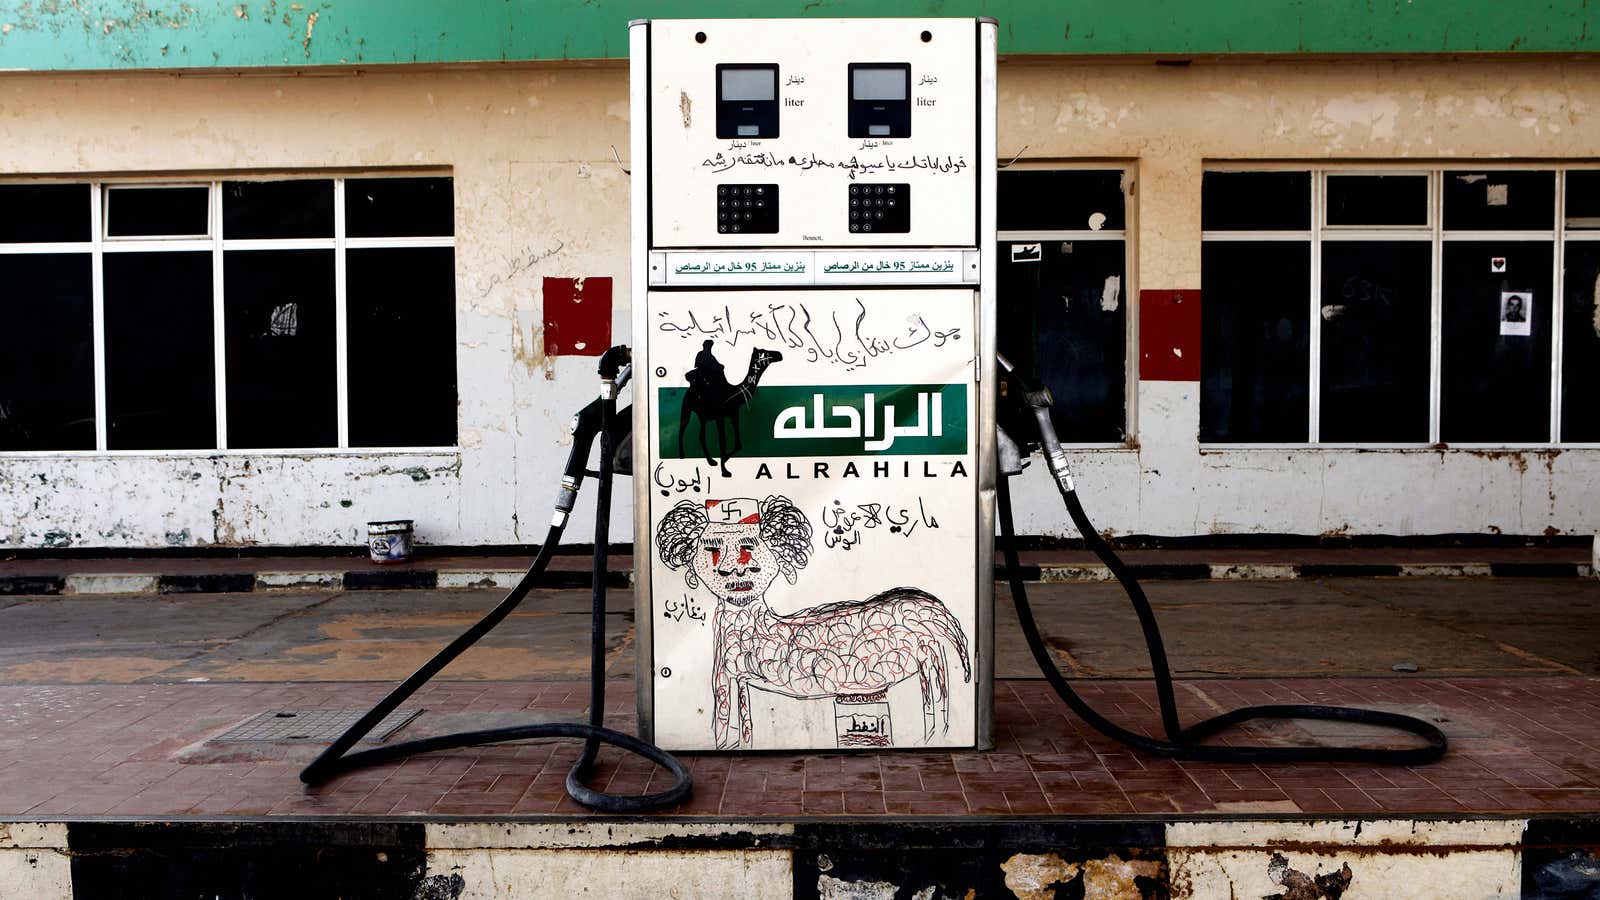 The question is how to fix Libya’s oil-dependent economy.